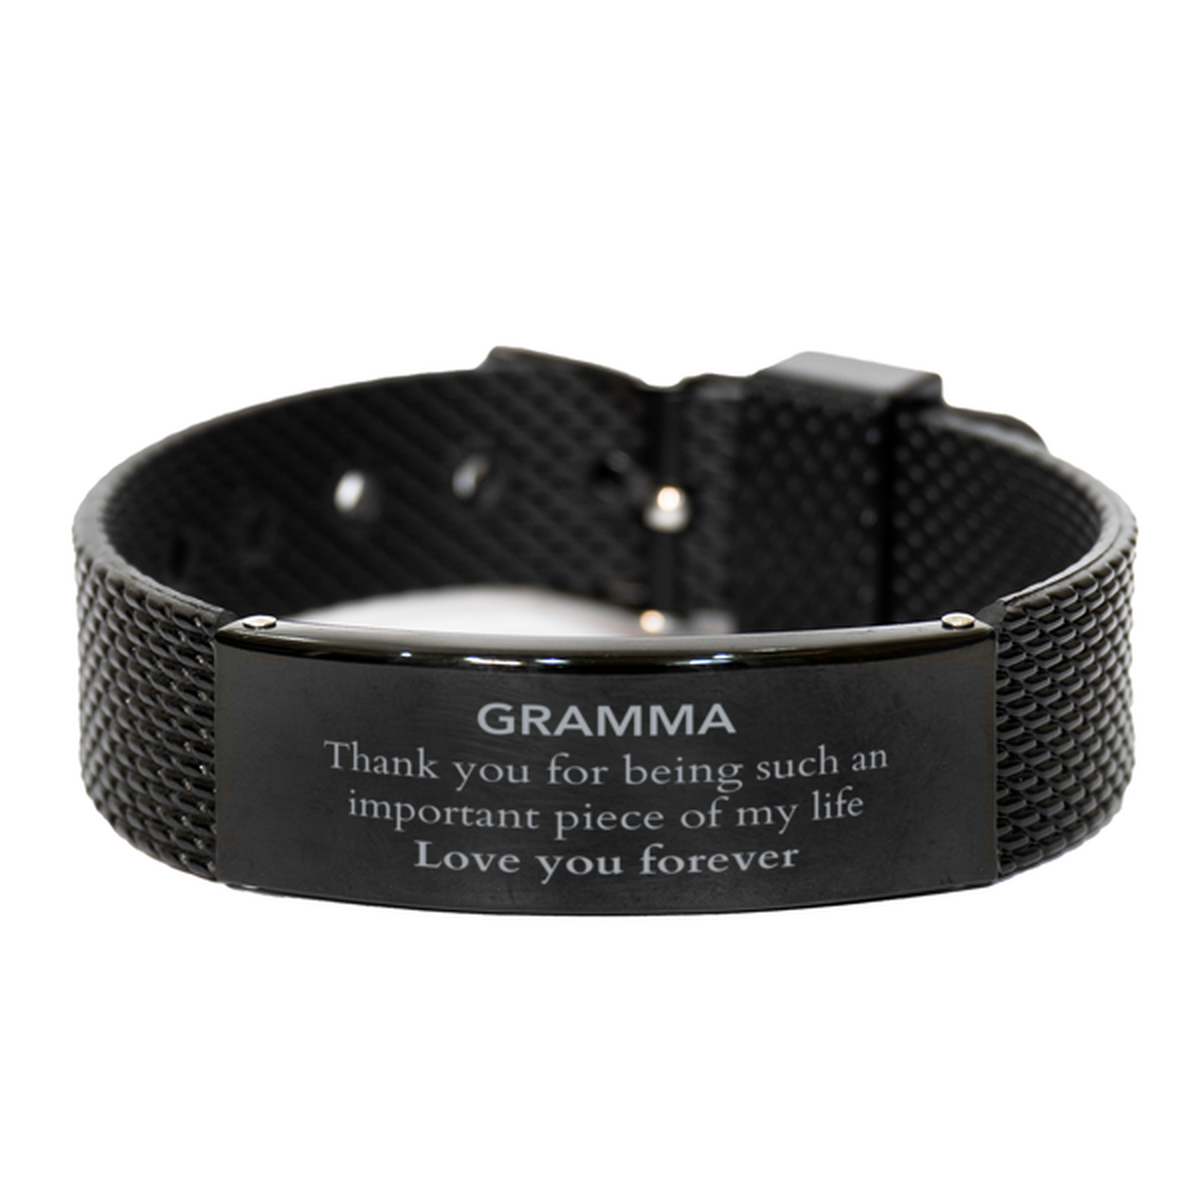 Appropriate Gramma Black Shark Mesh Bracelet Epic Birthday Gifts for Gramma Thank you for being such an important piece of my life Gramma Christmas Mothers Fathers Day